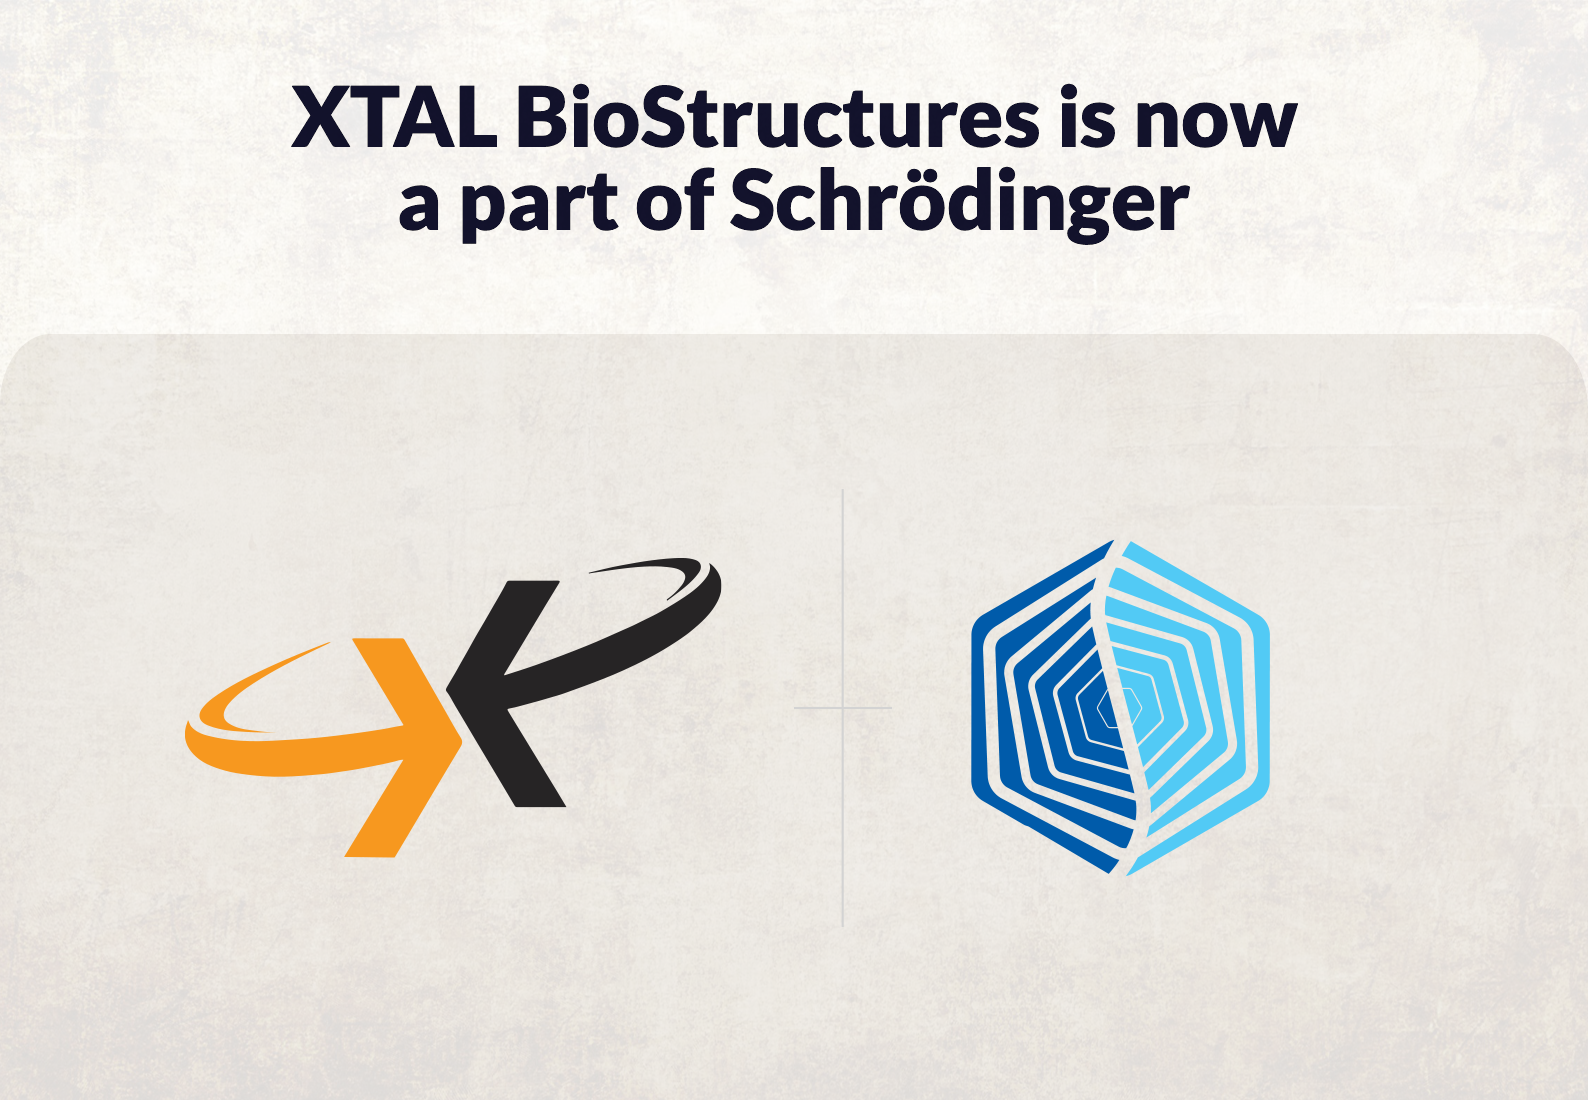 The logos for Schrödinger and XTAL BioStructures are shown side by side.